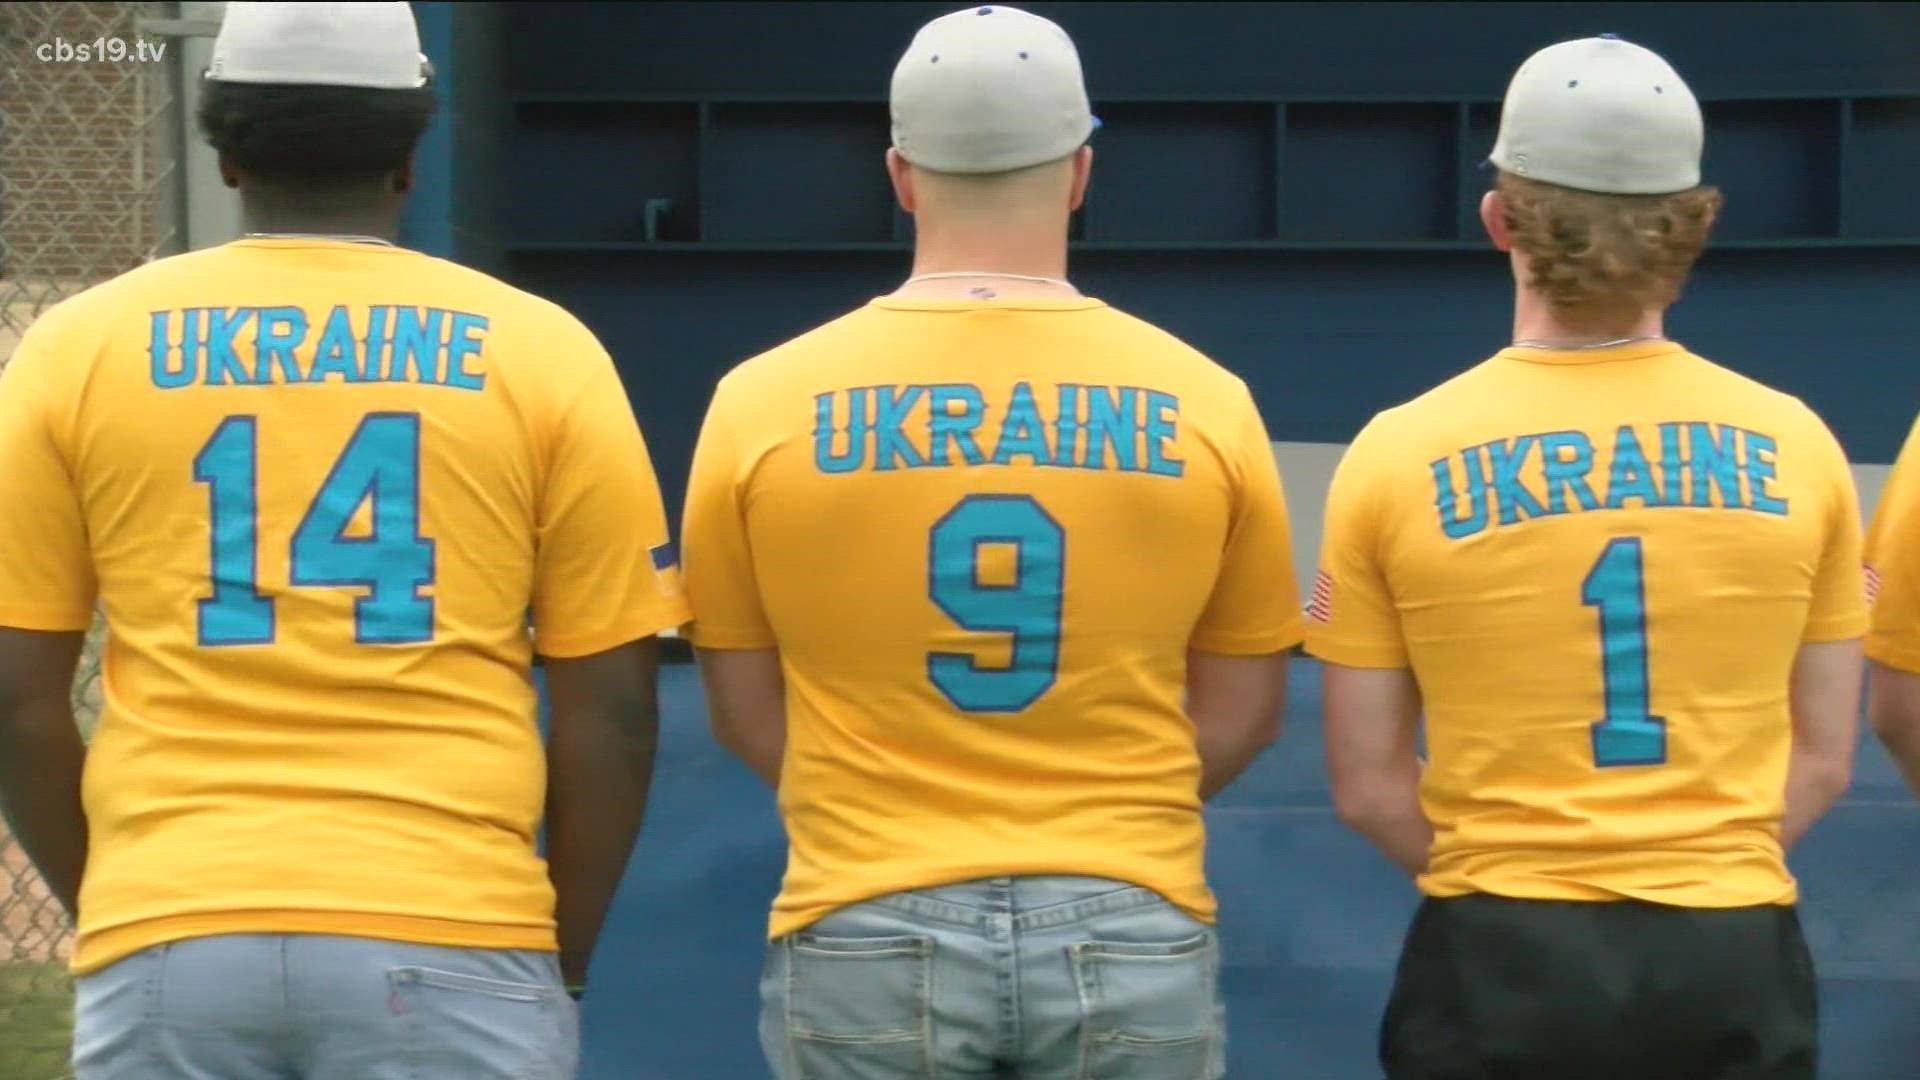 The Jacksonville Indian baseball team is honoring Ukraine with wearing it's name on their backs during competition.